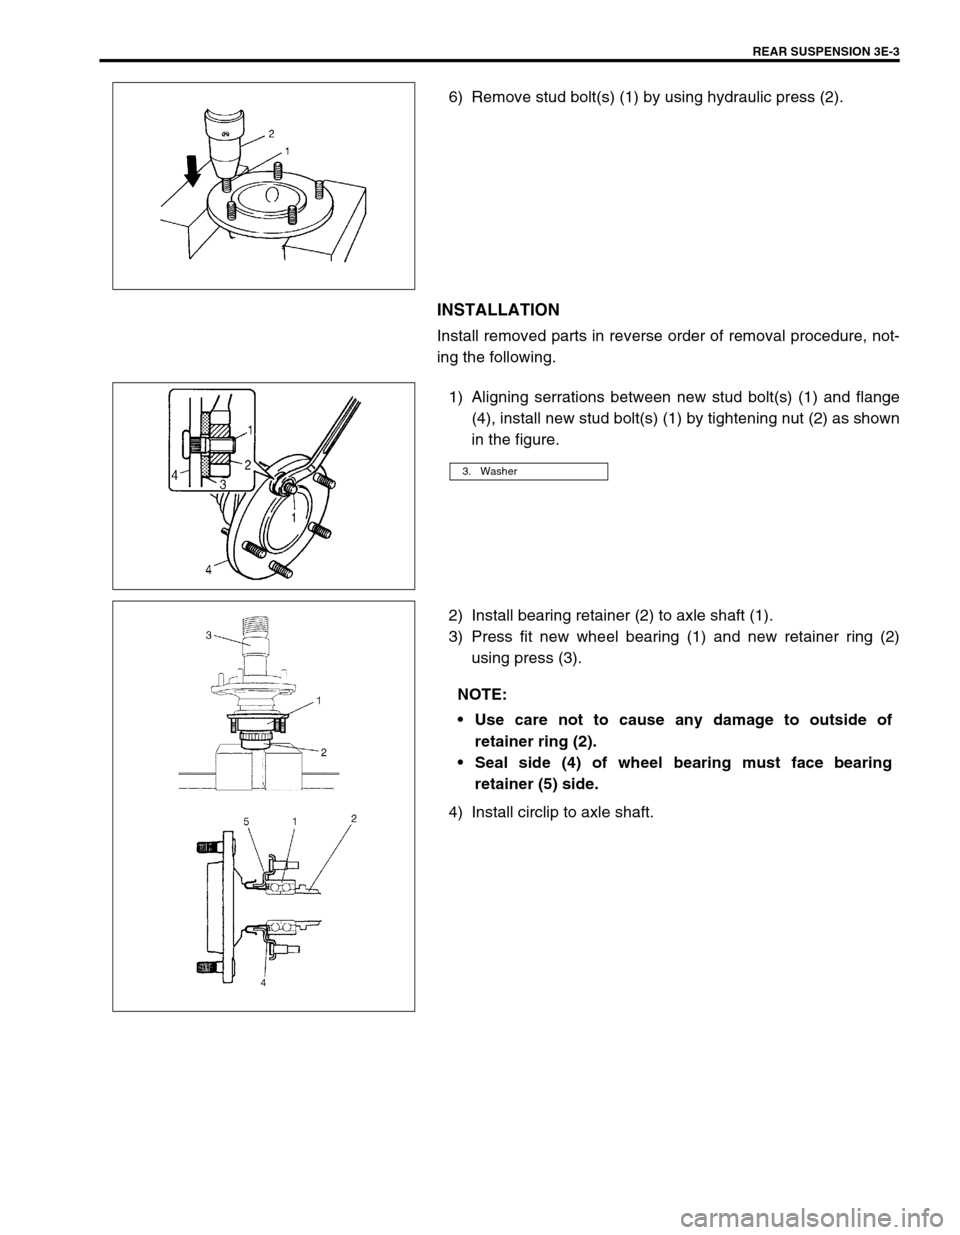 SUZUKI GRAND VITARA 2001 2.G Owners Manual REAR SUSPENSION 3E-3
6) Remove stud bolt(s) (1) by using hydraulic press (2).
INSTALLATION
Install removed parts in reverse order of removal procedure, not-
ing the following.
1) Aligning serrations b